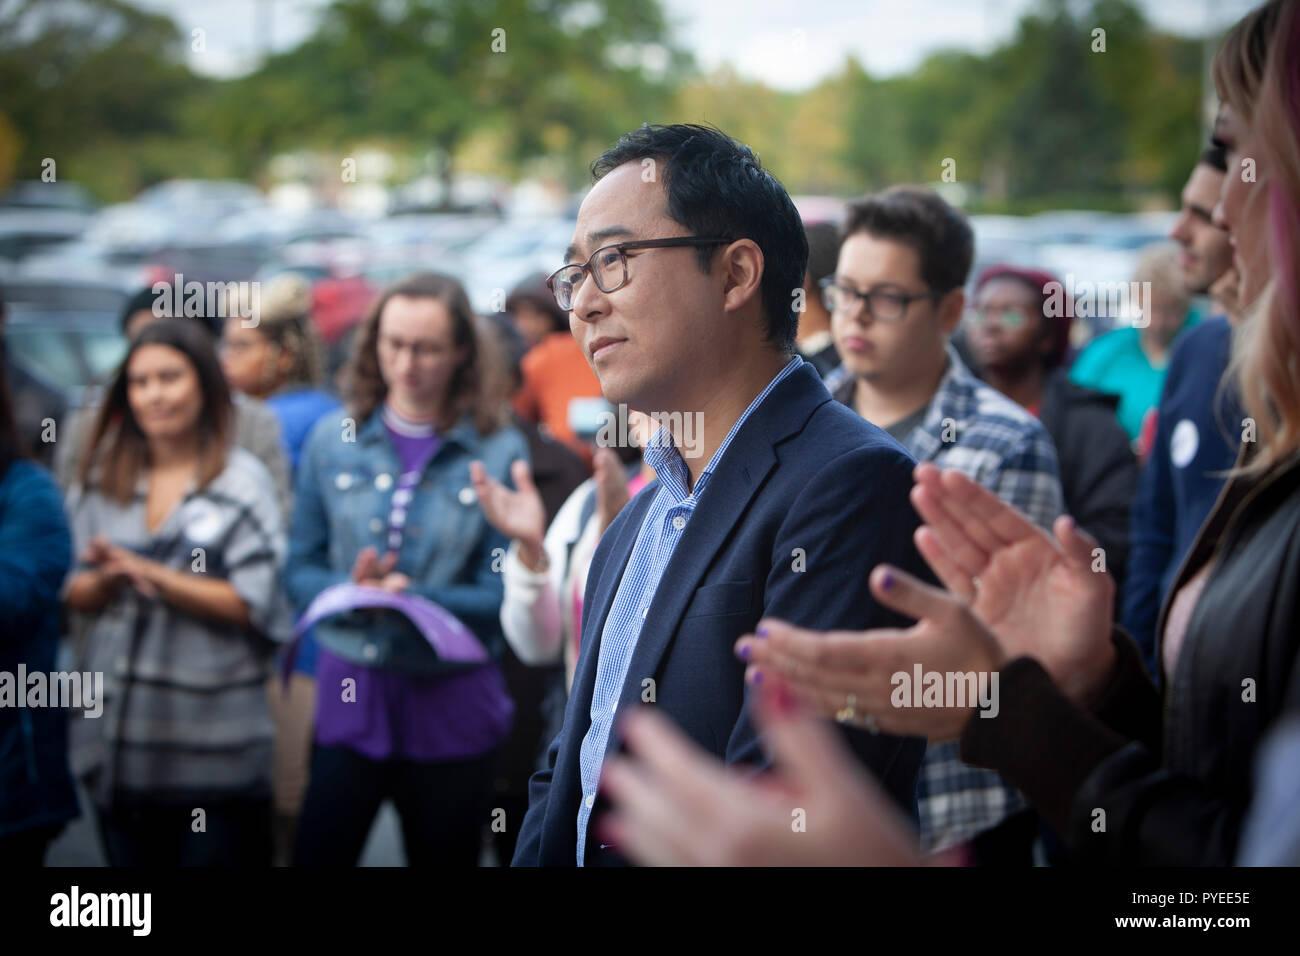 Oct 20, 2018. In a key battleground district in New Jersey, Democratic Challenger Andy Kim holds a ”Women’s Rally” to empower and encourage women to vote in the 2018 Midterms. Andy Kim, a former national security official during the Obama administration and Republican Rep. Tom MacArthur are locked in a “statistical tie” in the 3rd Congessional District in South Jersey. A new Stockton University poll shows MacArthur, a prime mover in the effort to repeal the Affordable Care Act under President Trump, in a fight for his political life against Kim. Photo by Gary Ell Stock Photo